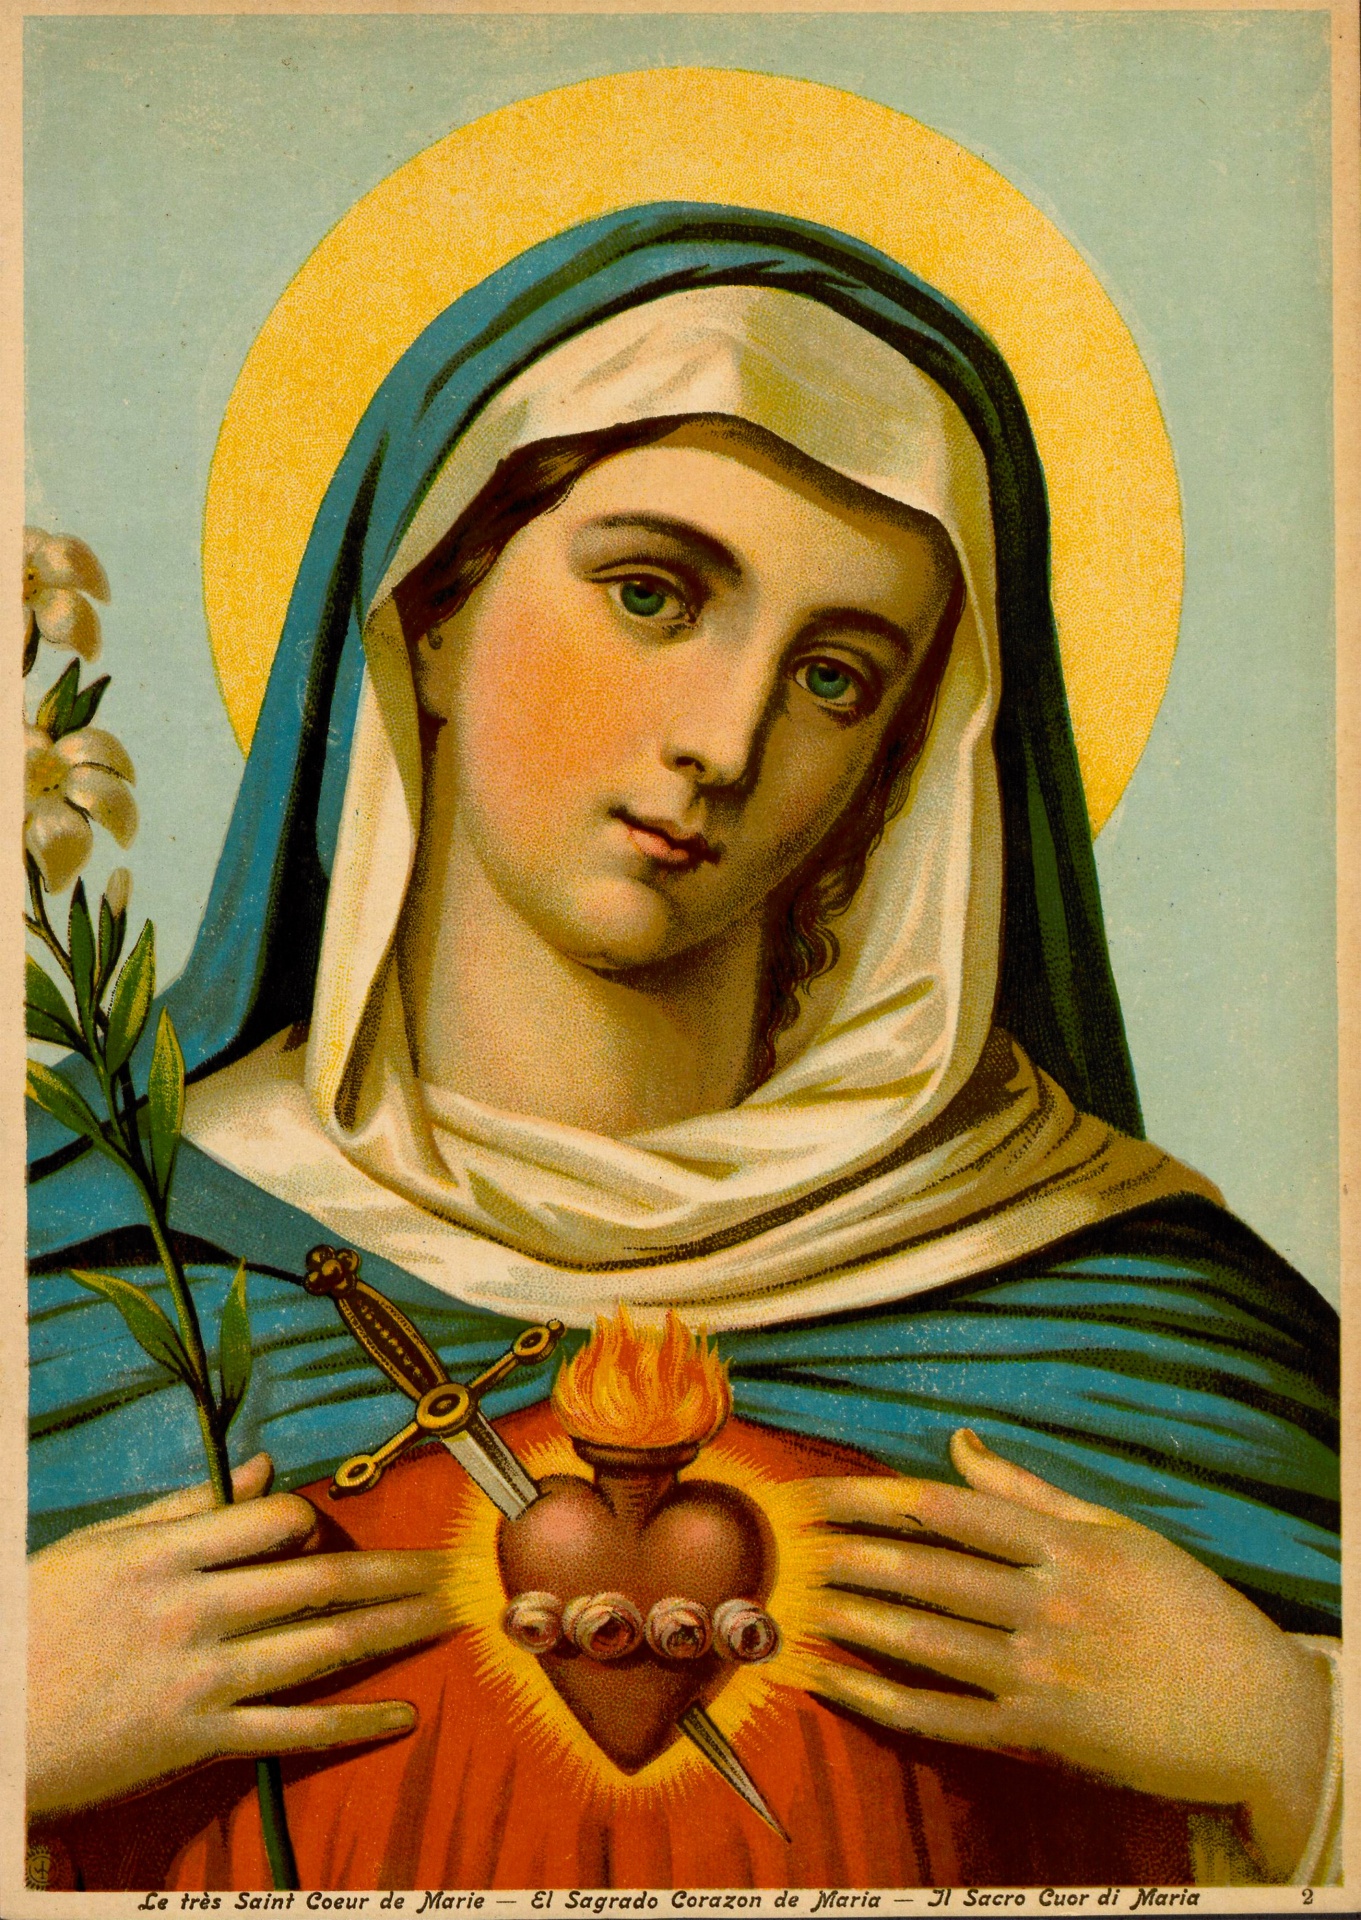 Vintage art illustration of Sagrado Coração de Maria, Immaculate Heart of Mary, the mother of Jesus holding a red heart